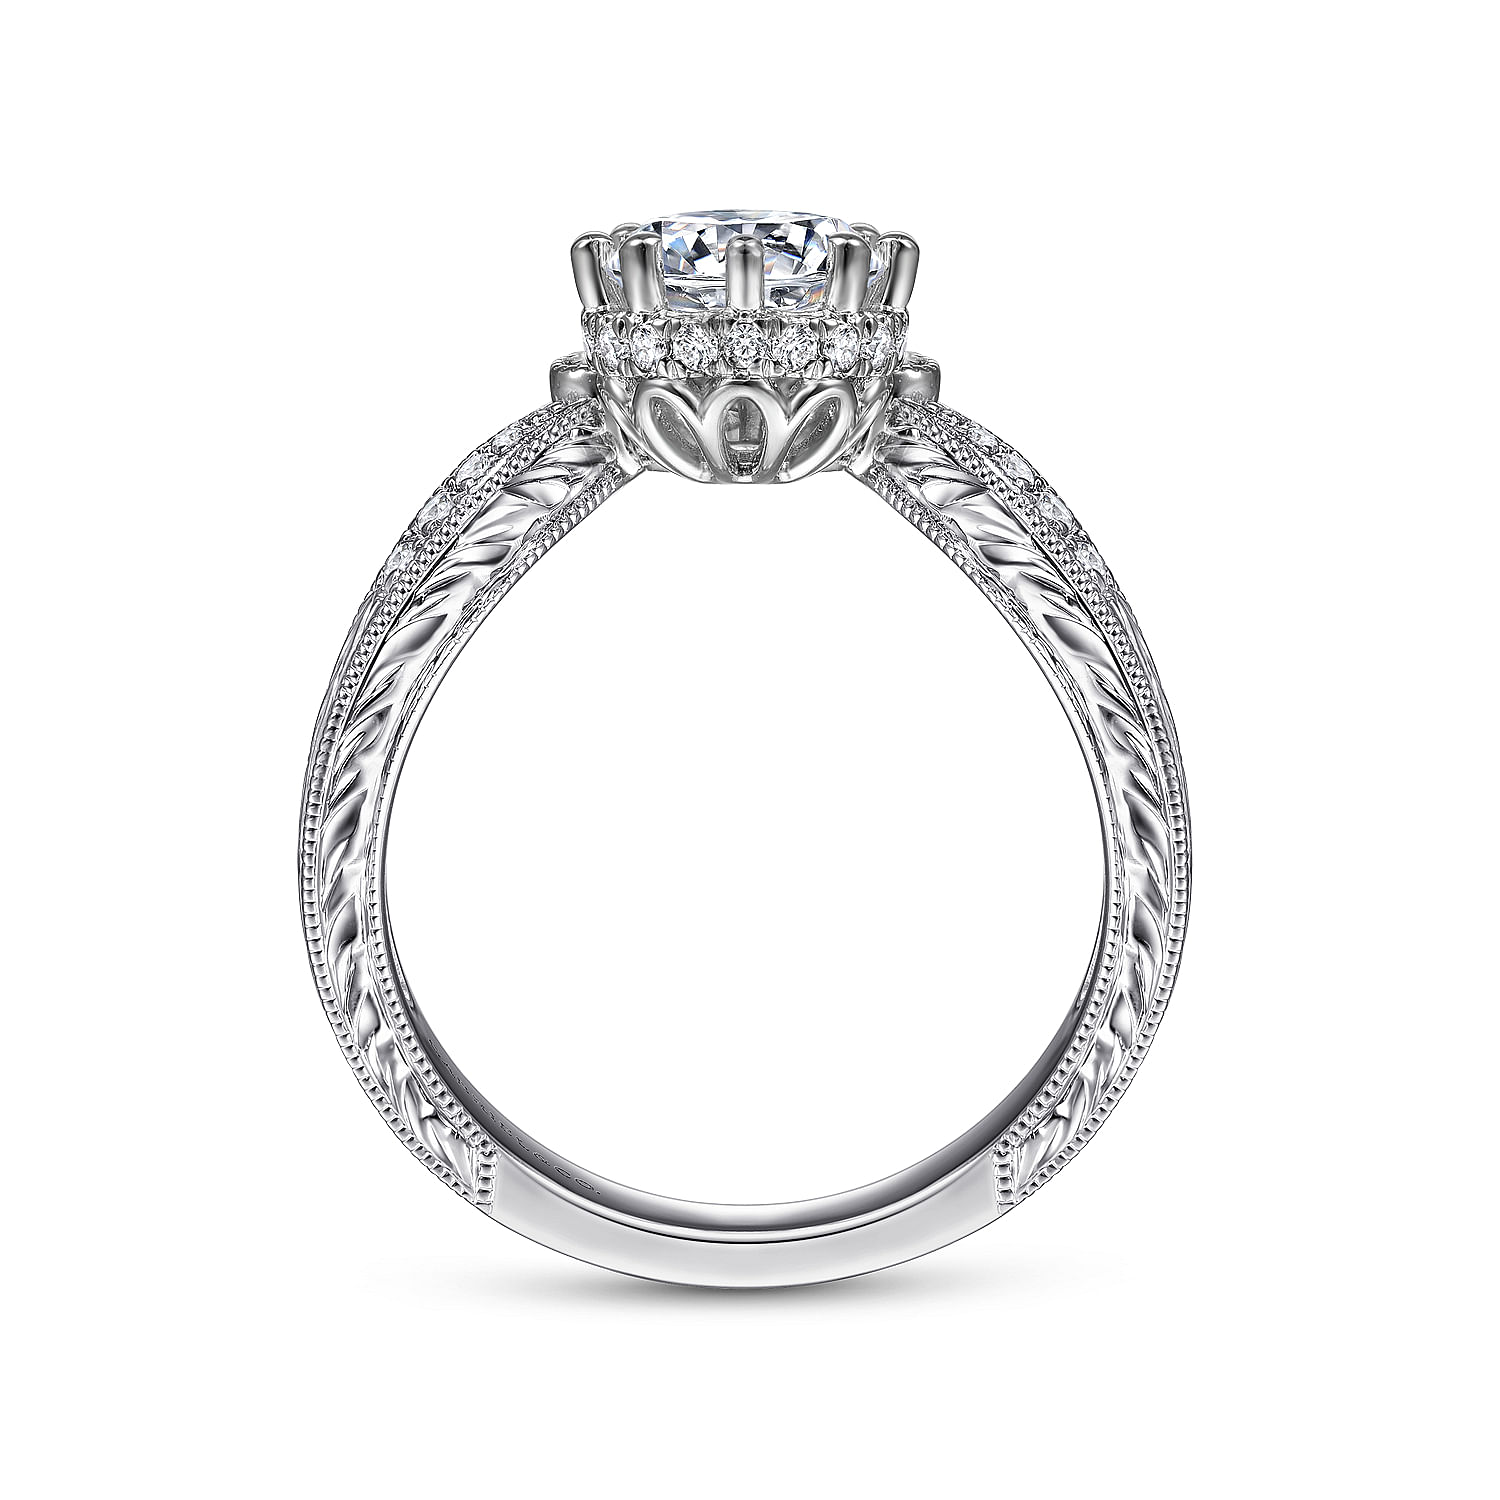 Vintage Inspired 14K White Gold Round Curved Diamond Engagement Ring